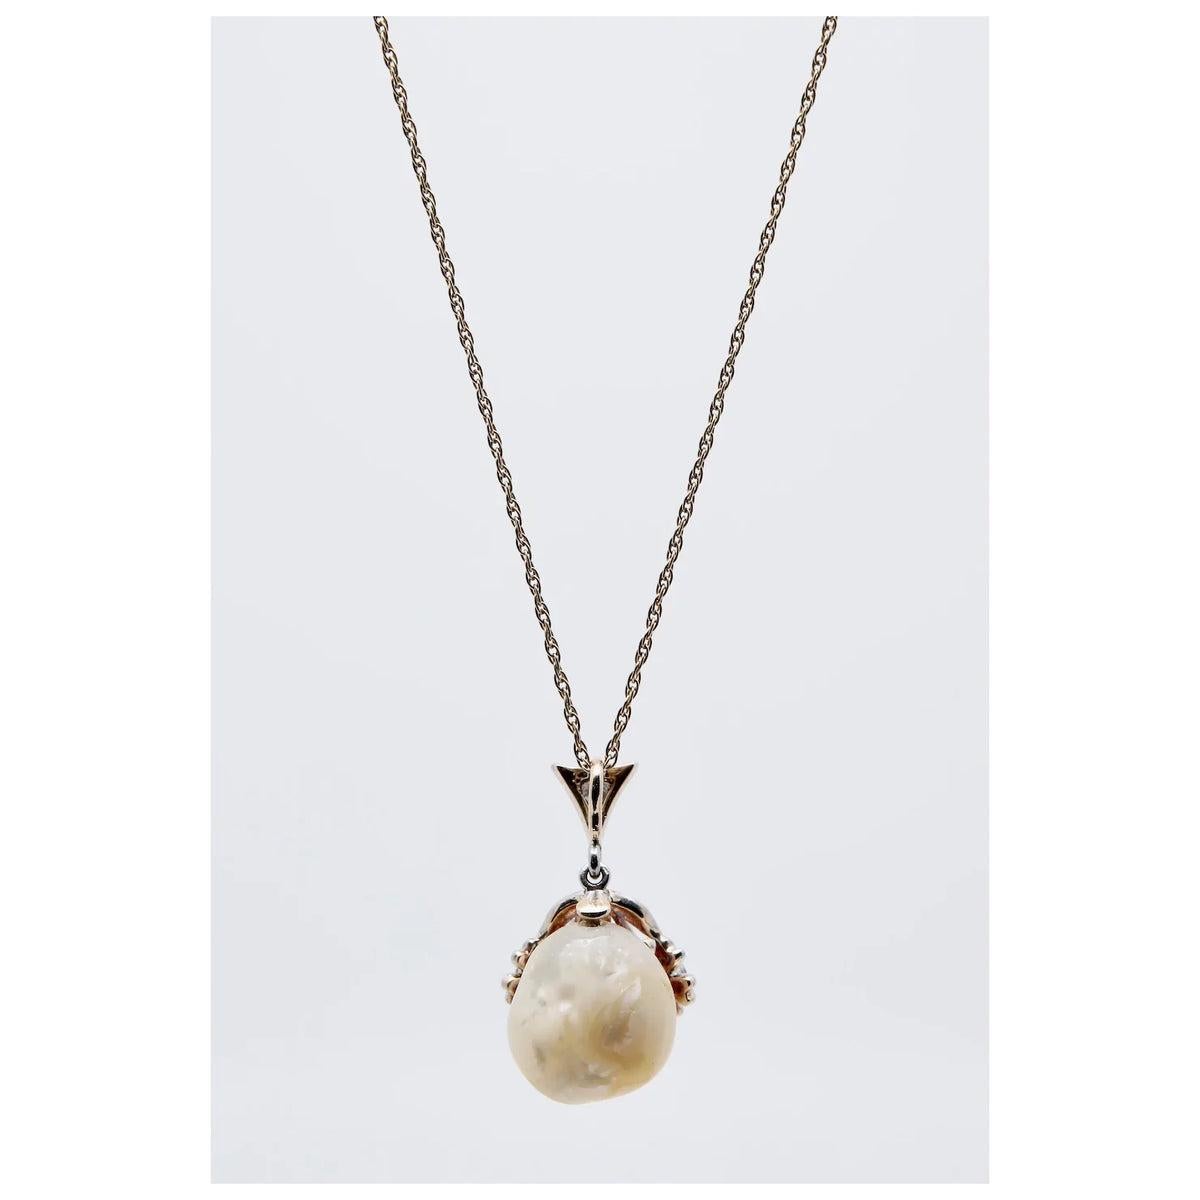 Aston Estate Jewelry Presents:

An Art Nouveau period diamond, and natural river pearl pendant in platinum. Featuring a natural freshwater American river pearl accented by two diamond set flowers and suspended from a diamond set bale. Weighing a